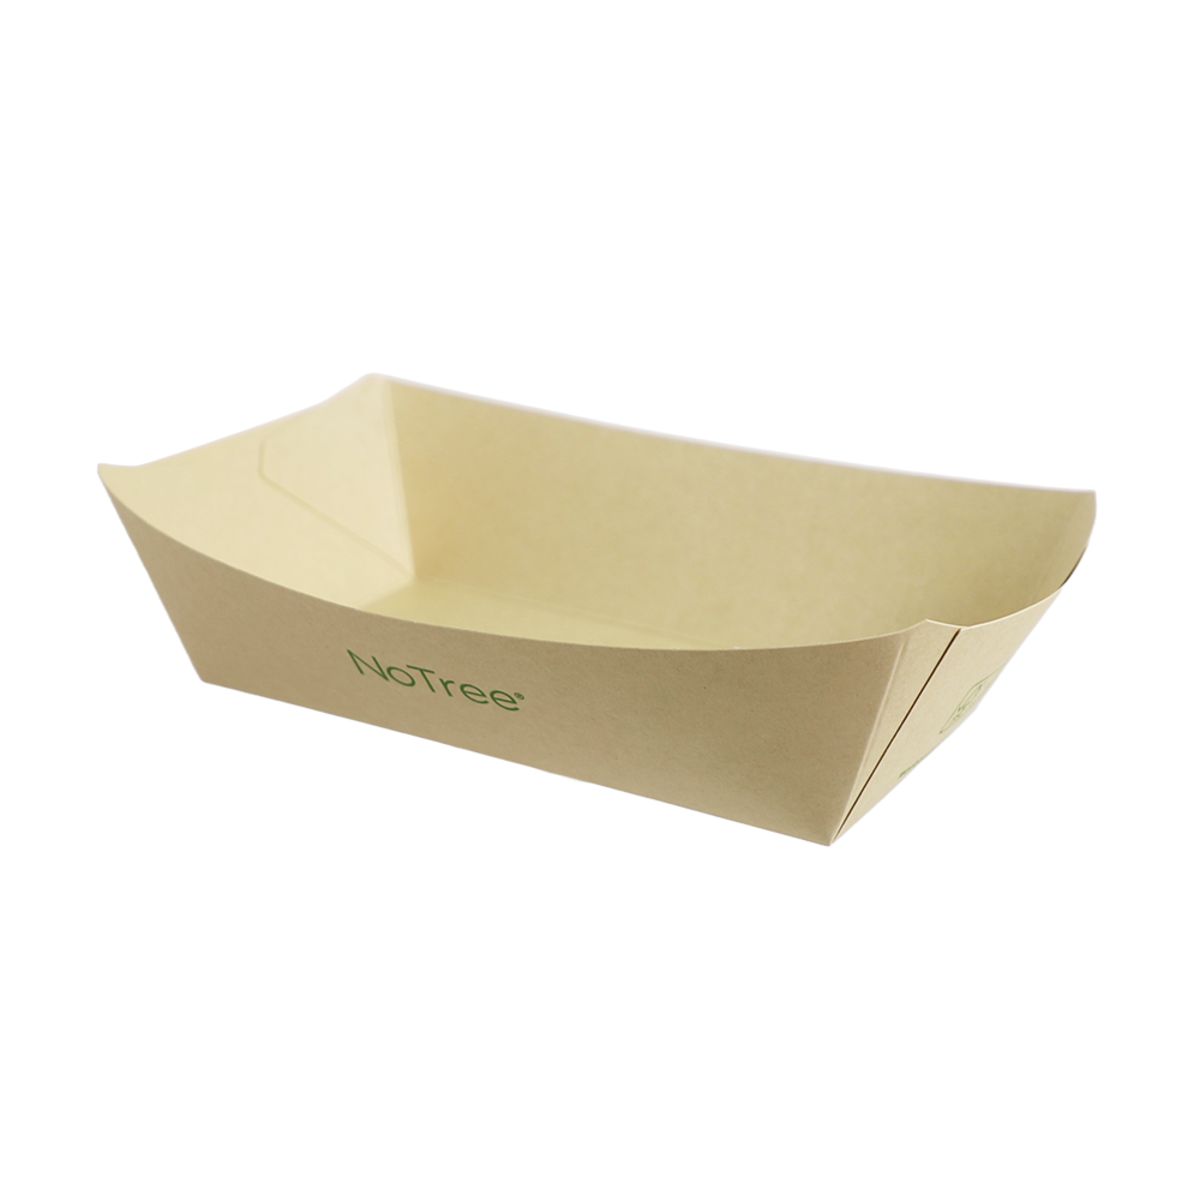 5 LB NoTree Boat Tray - Case of 500 - World Centric